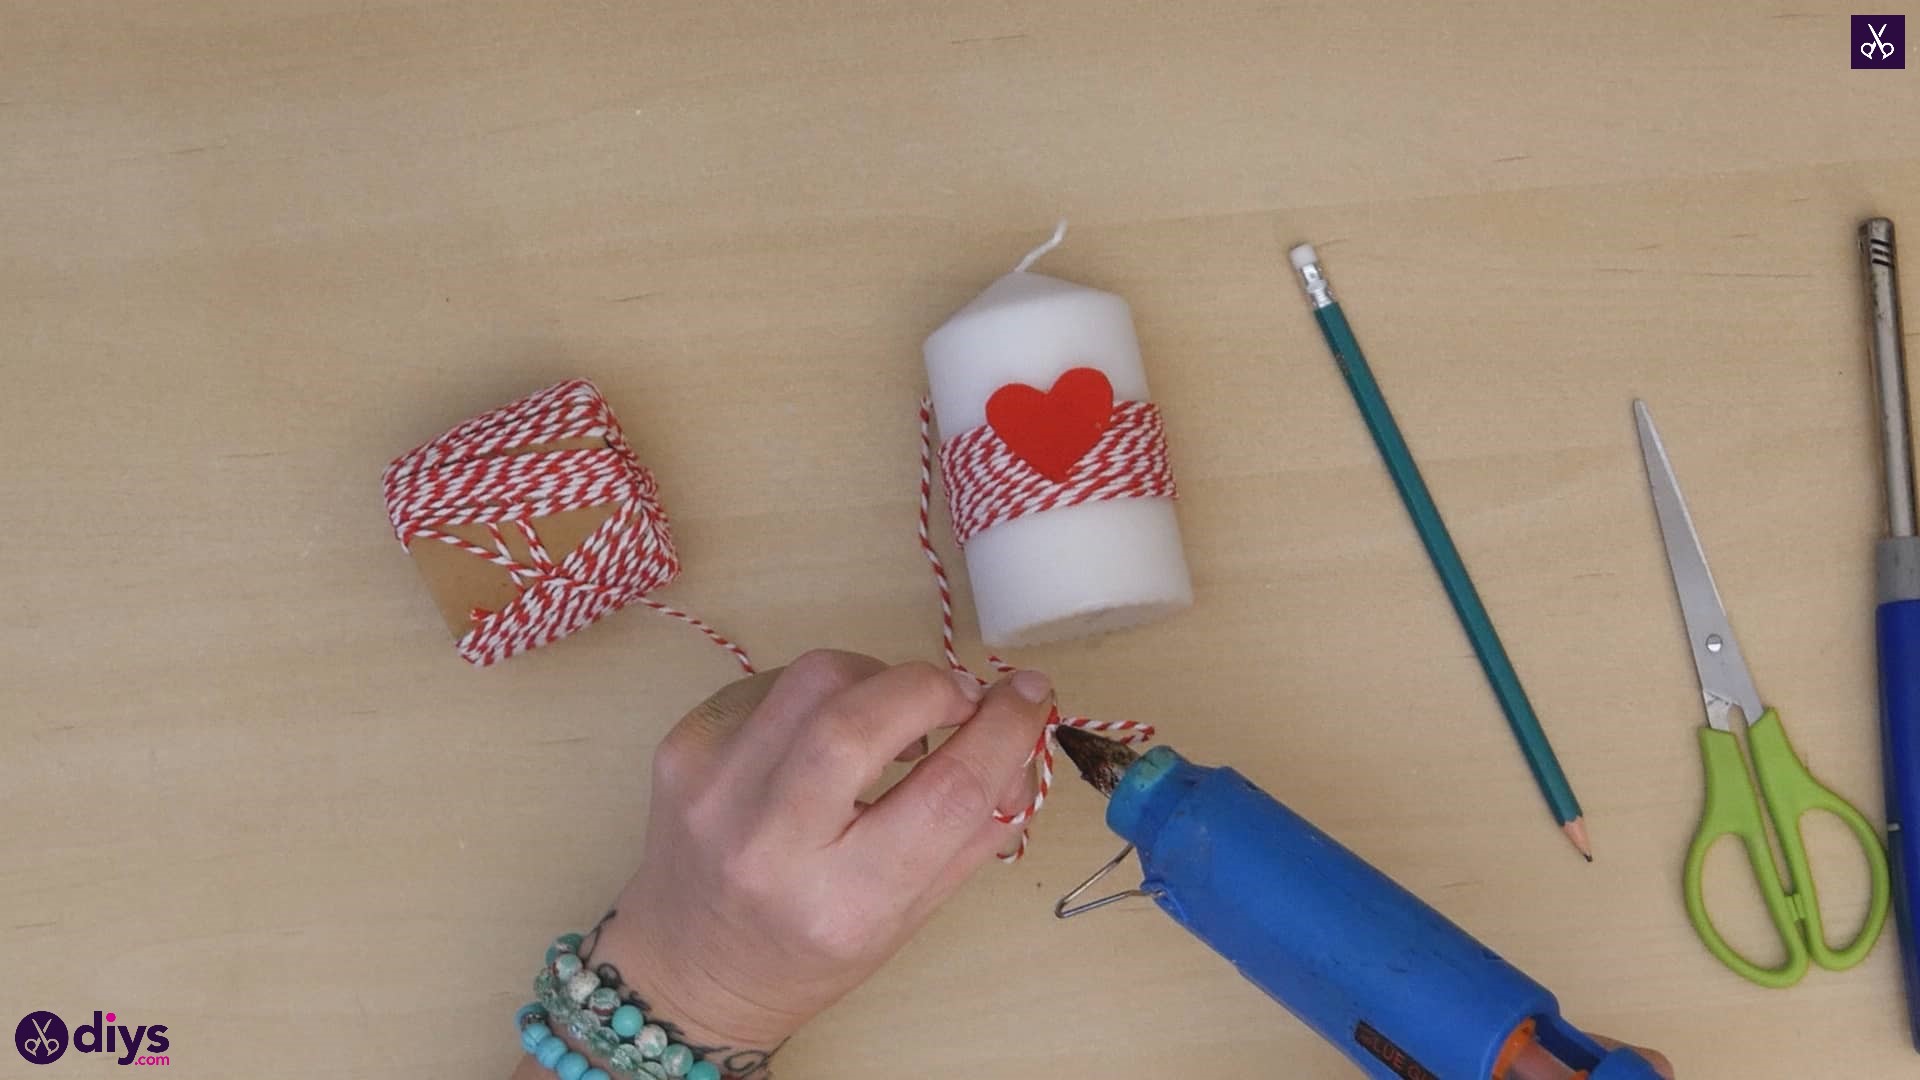 Diy valentine’s candle red paper step 5b